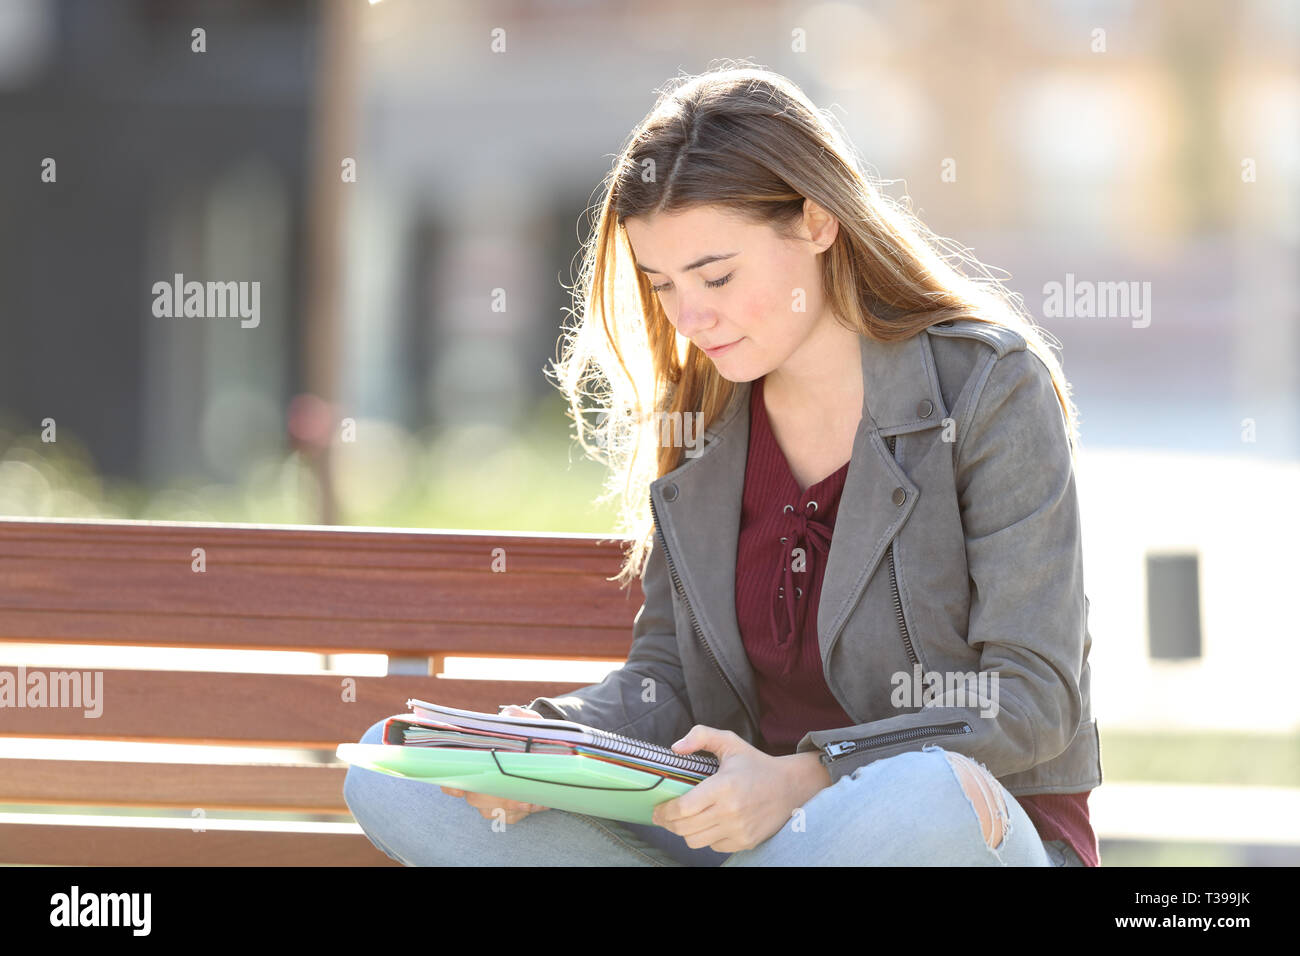 Concentrated student learning reading notes sitting on a bench in a park Stock Photo